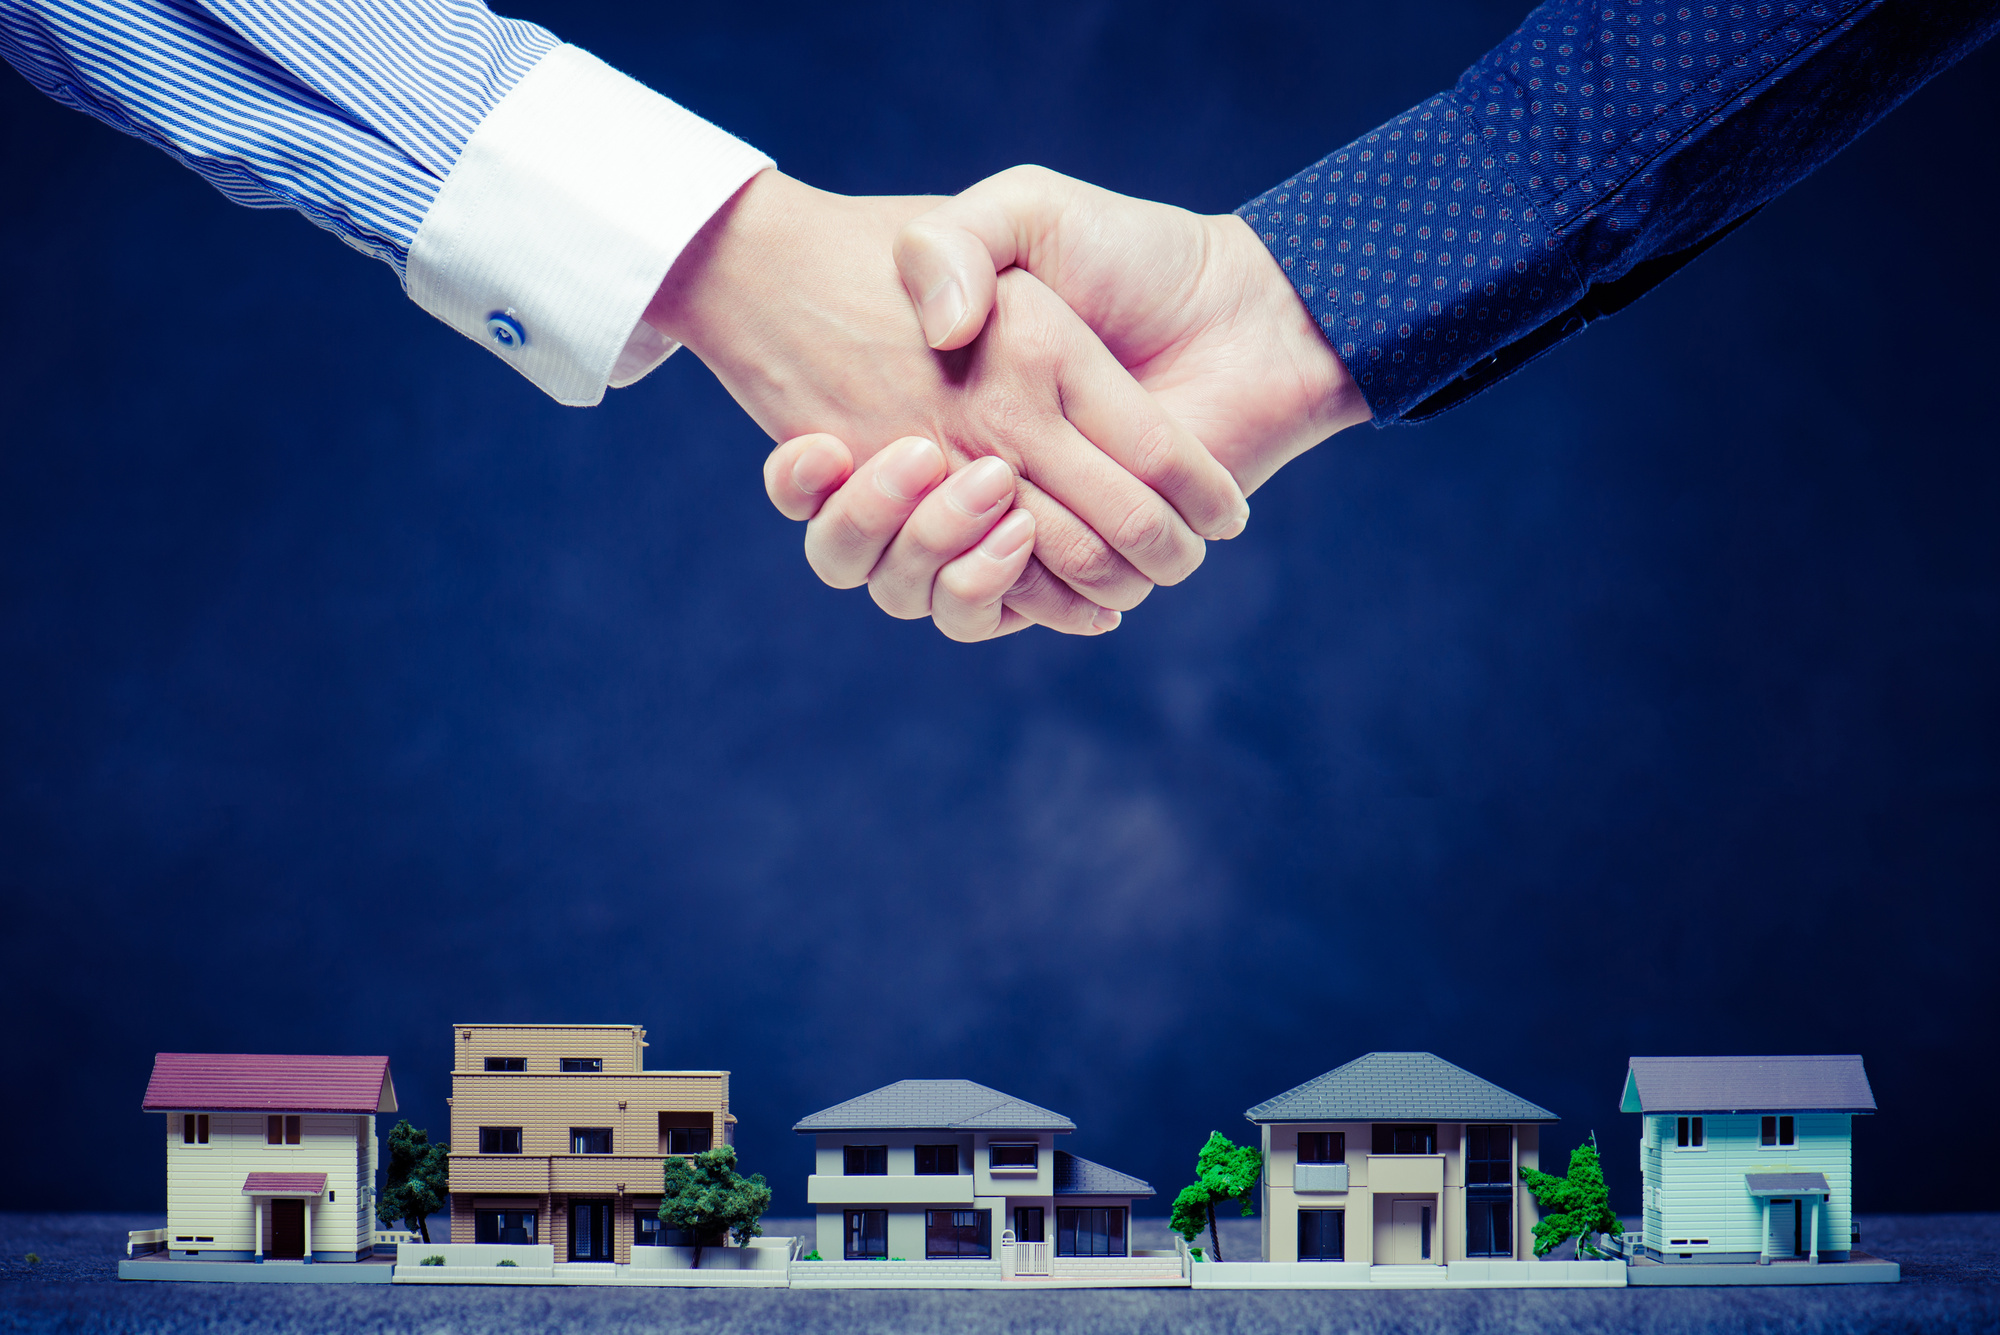 How a Good Property Manager Can Help You Find Good Tenants